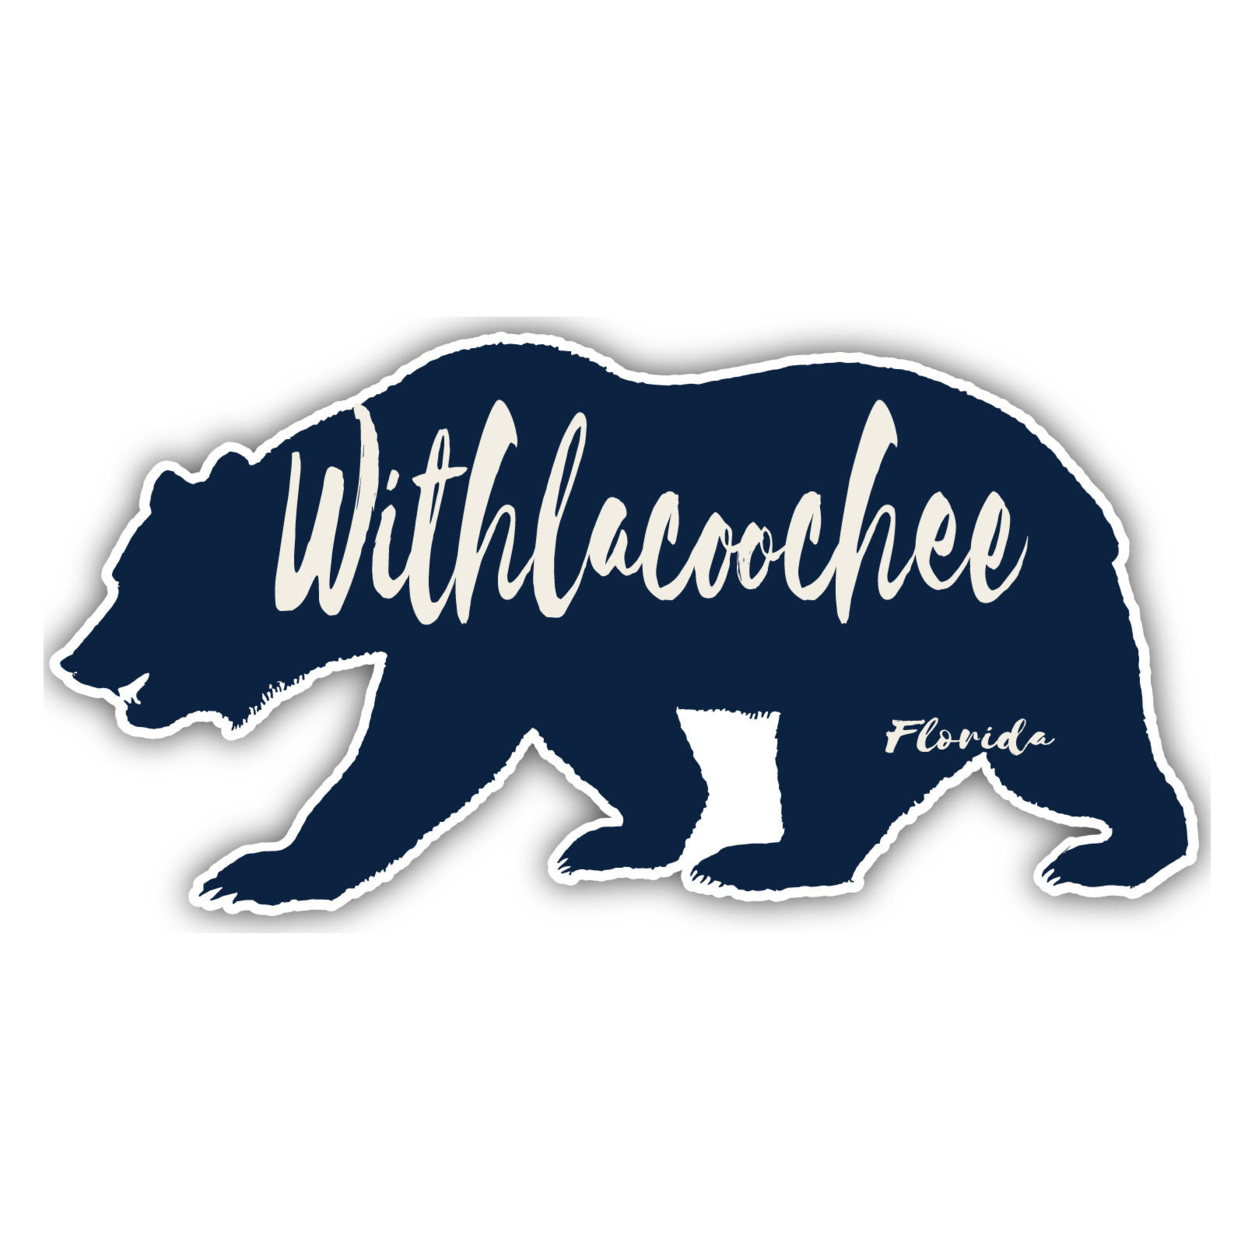 Withlacoochee Florida Souvenir Decorative Stickers (Choose Theme And Size) - Single Unit, 2-Inch, Great Outdoors